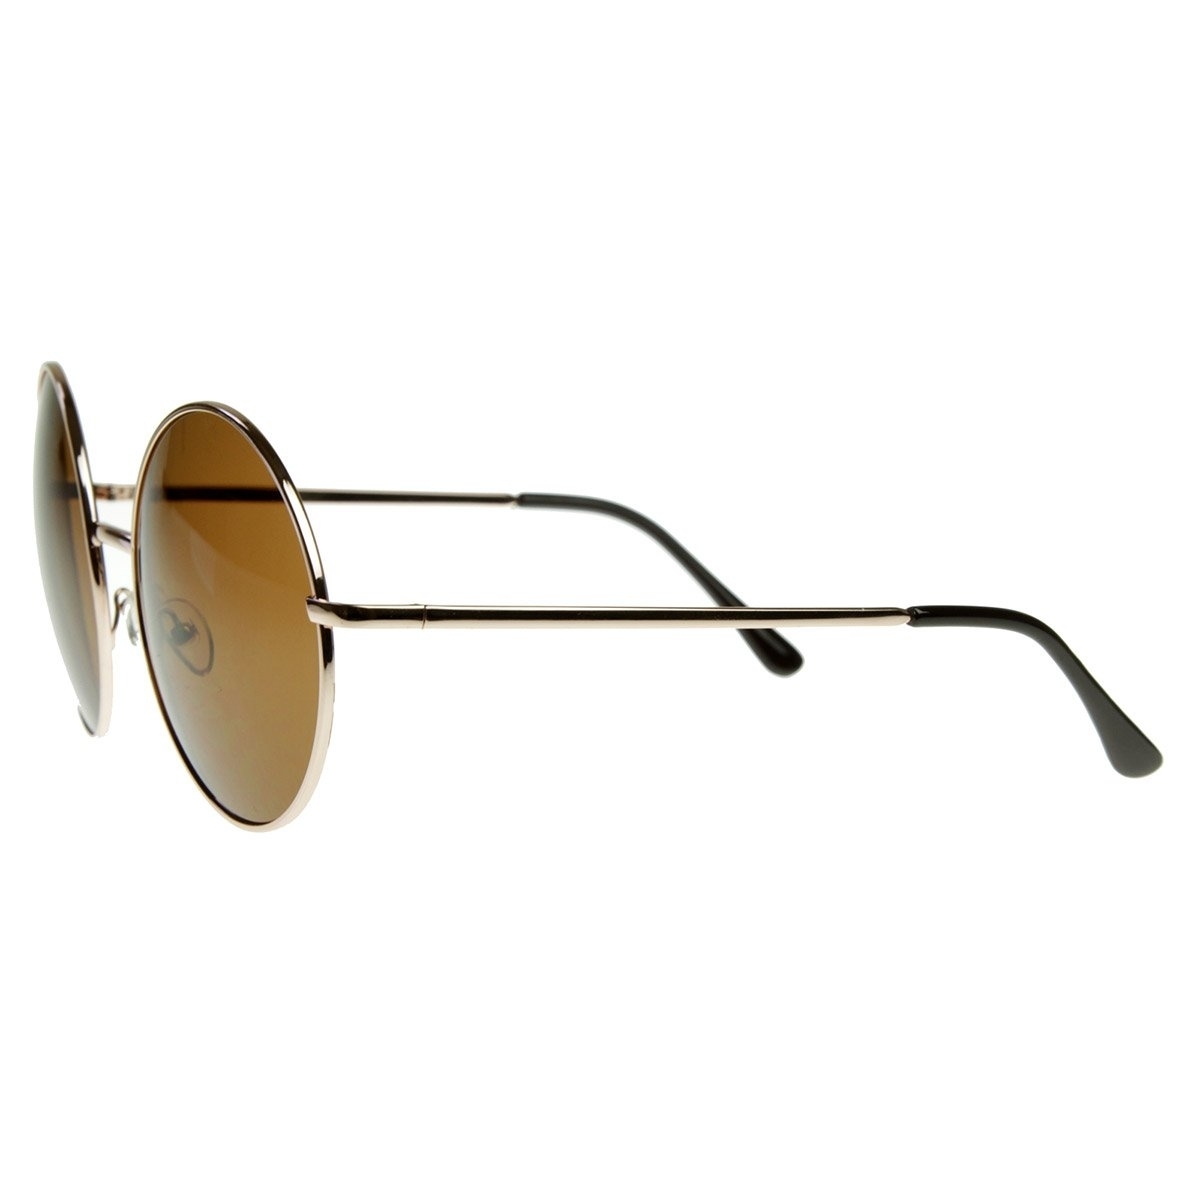 Super Large Oversized Metal Round Circle Sunglasses - Gold Green